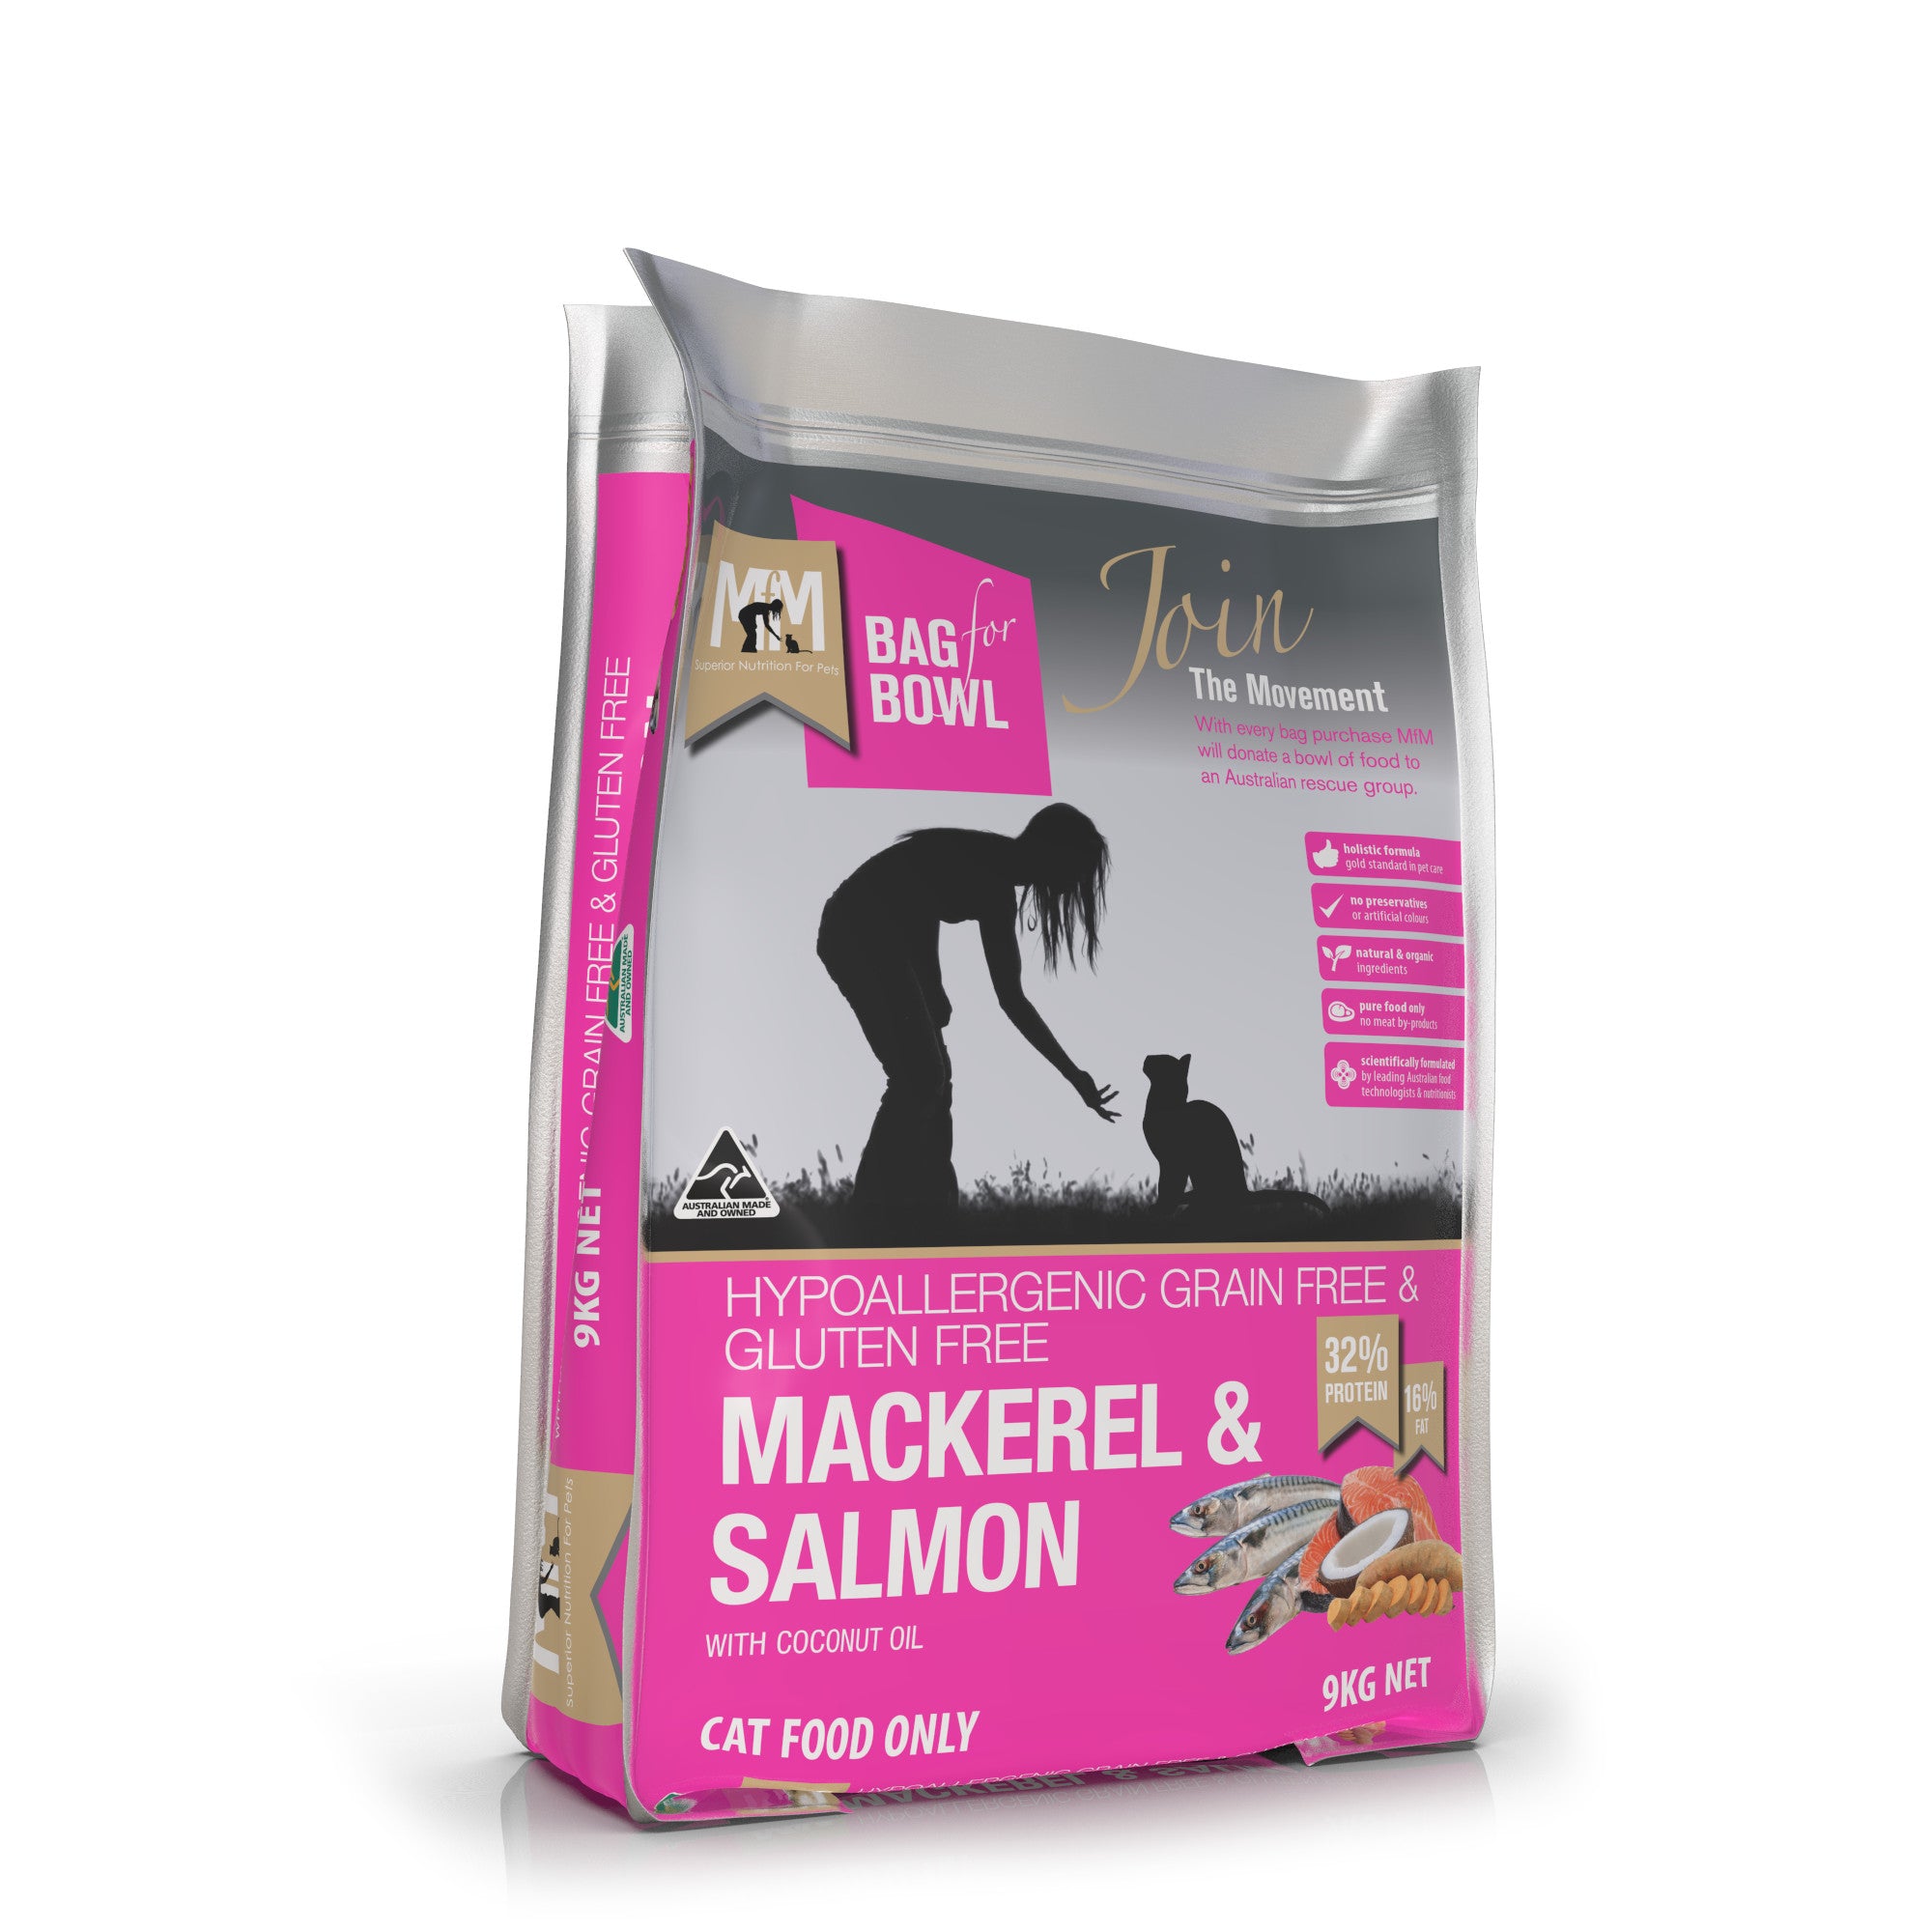 Meals for Meows Mackerel & Salmon Dry Cat Food 9kg.